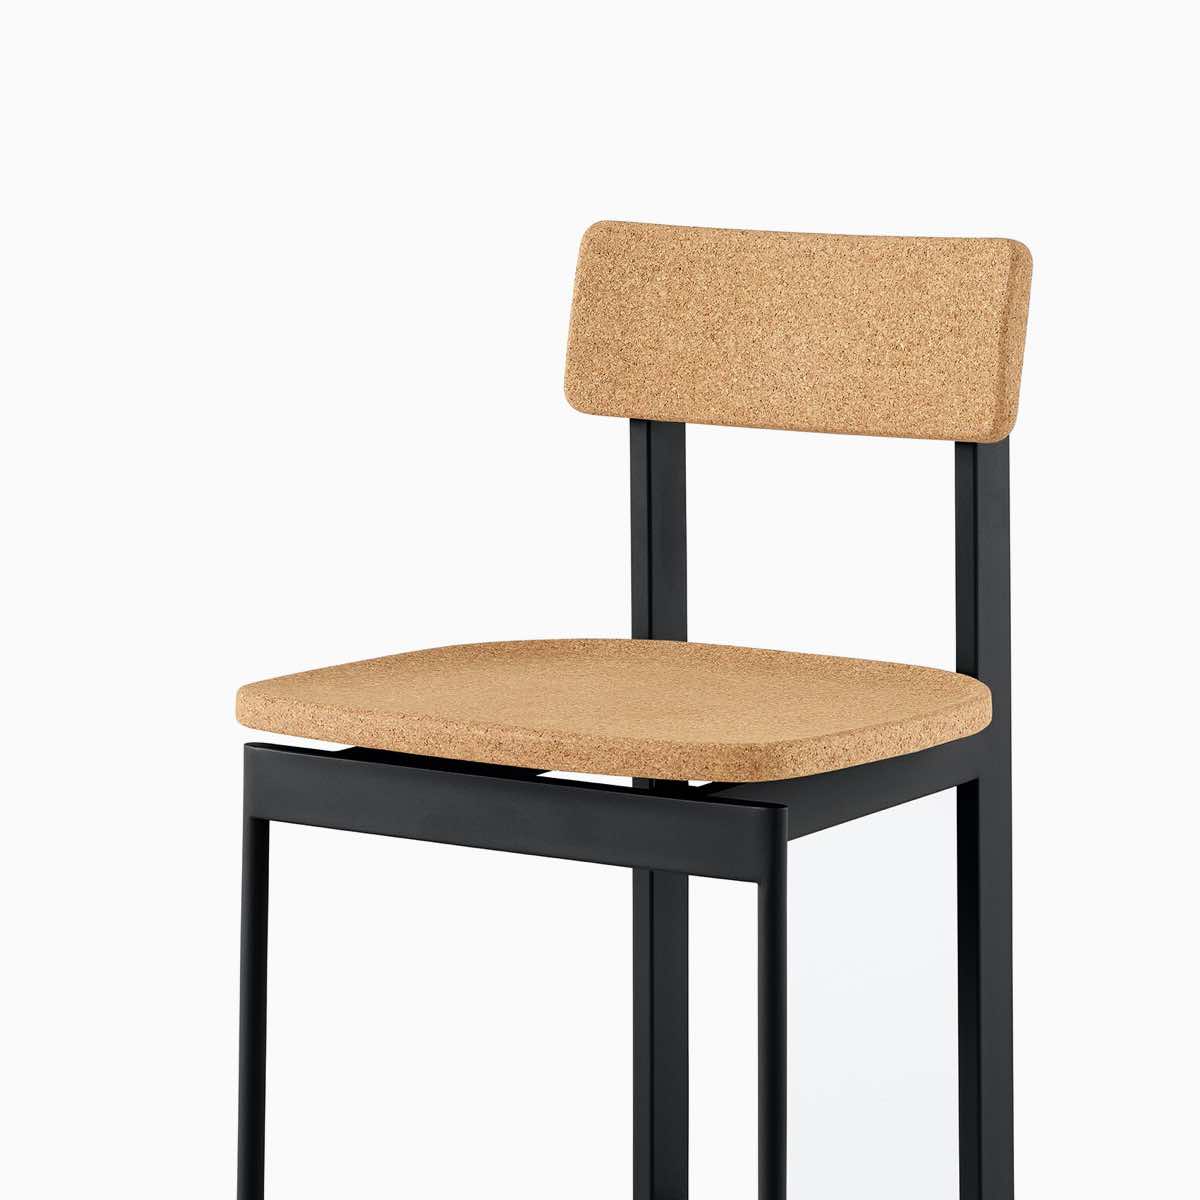 A cork Betwixt bar stool with a black frame.